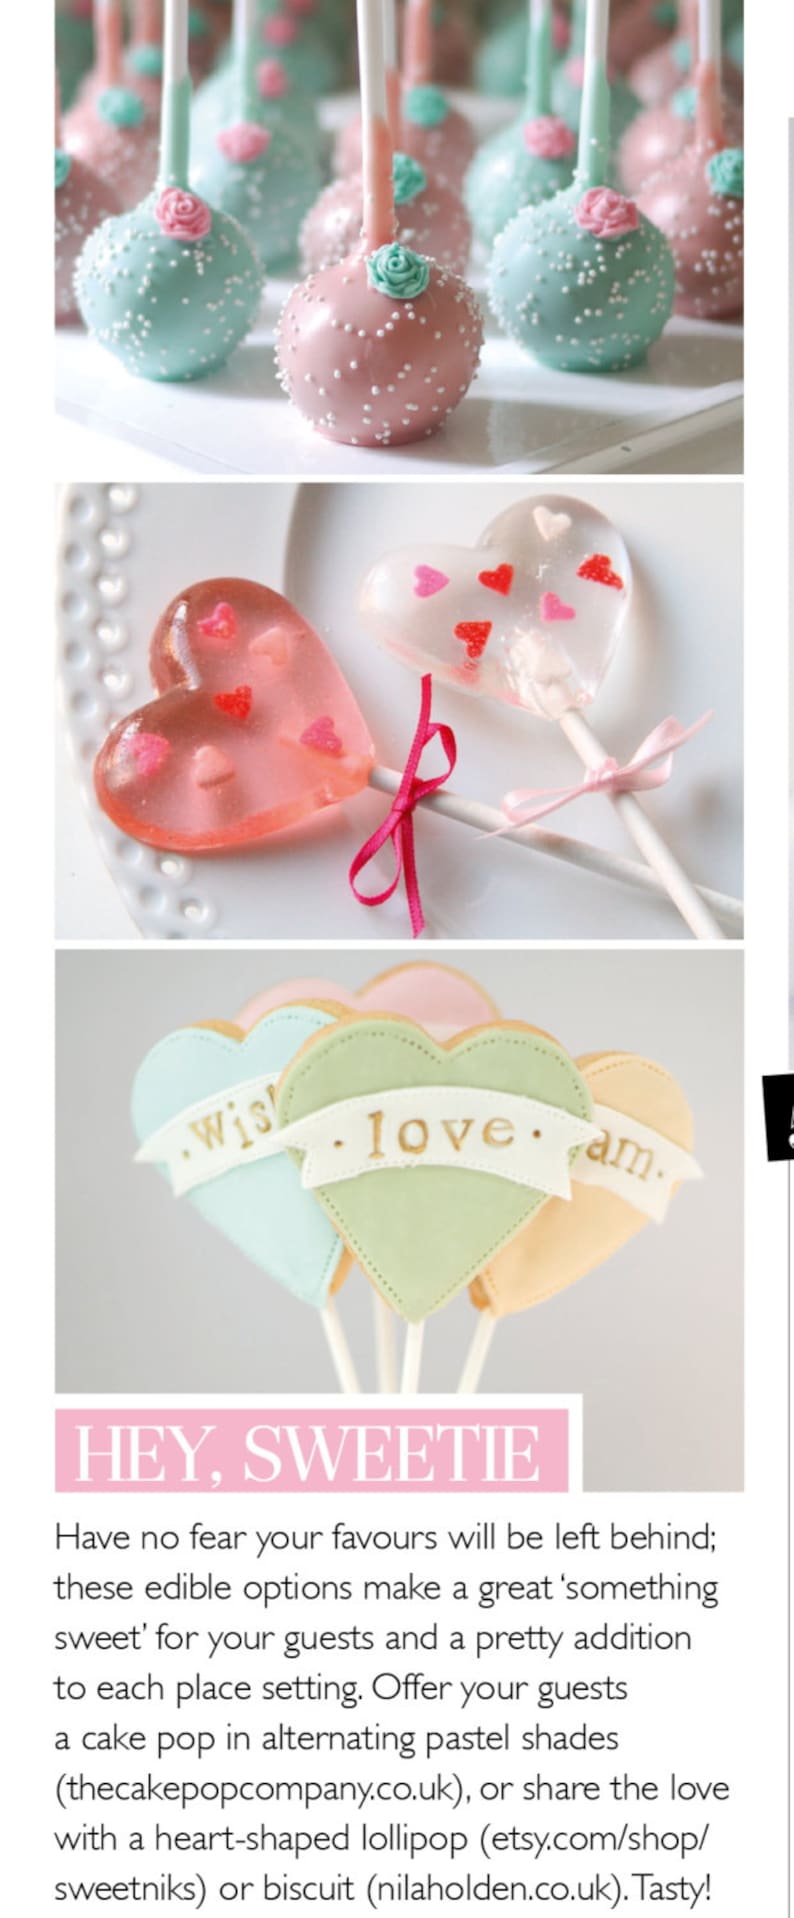 Sweet Heart Lollipop Valentine Party Favors Fun Valentine Party Gift Candy Hearts with Sprinkles 8 PCS image 2